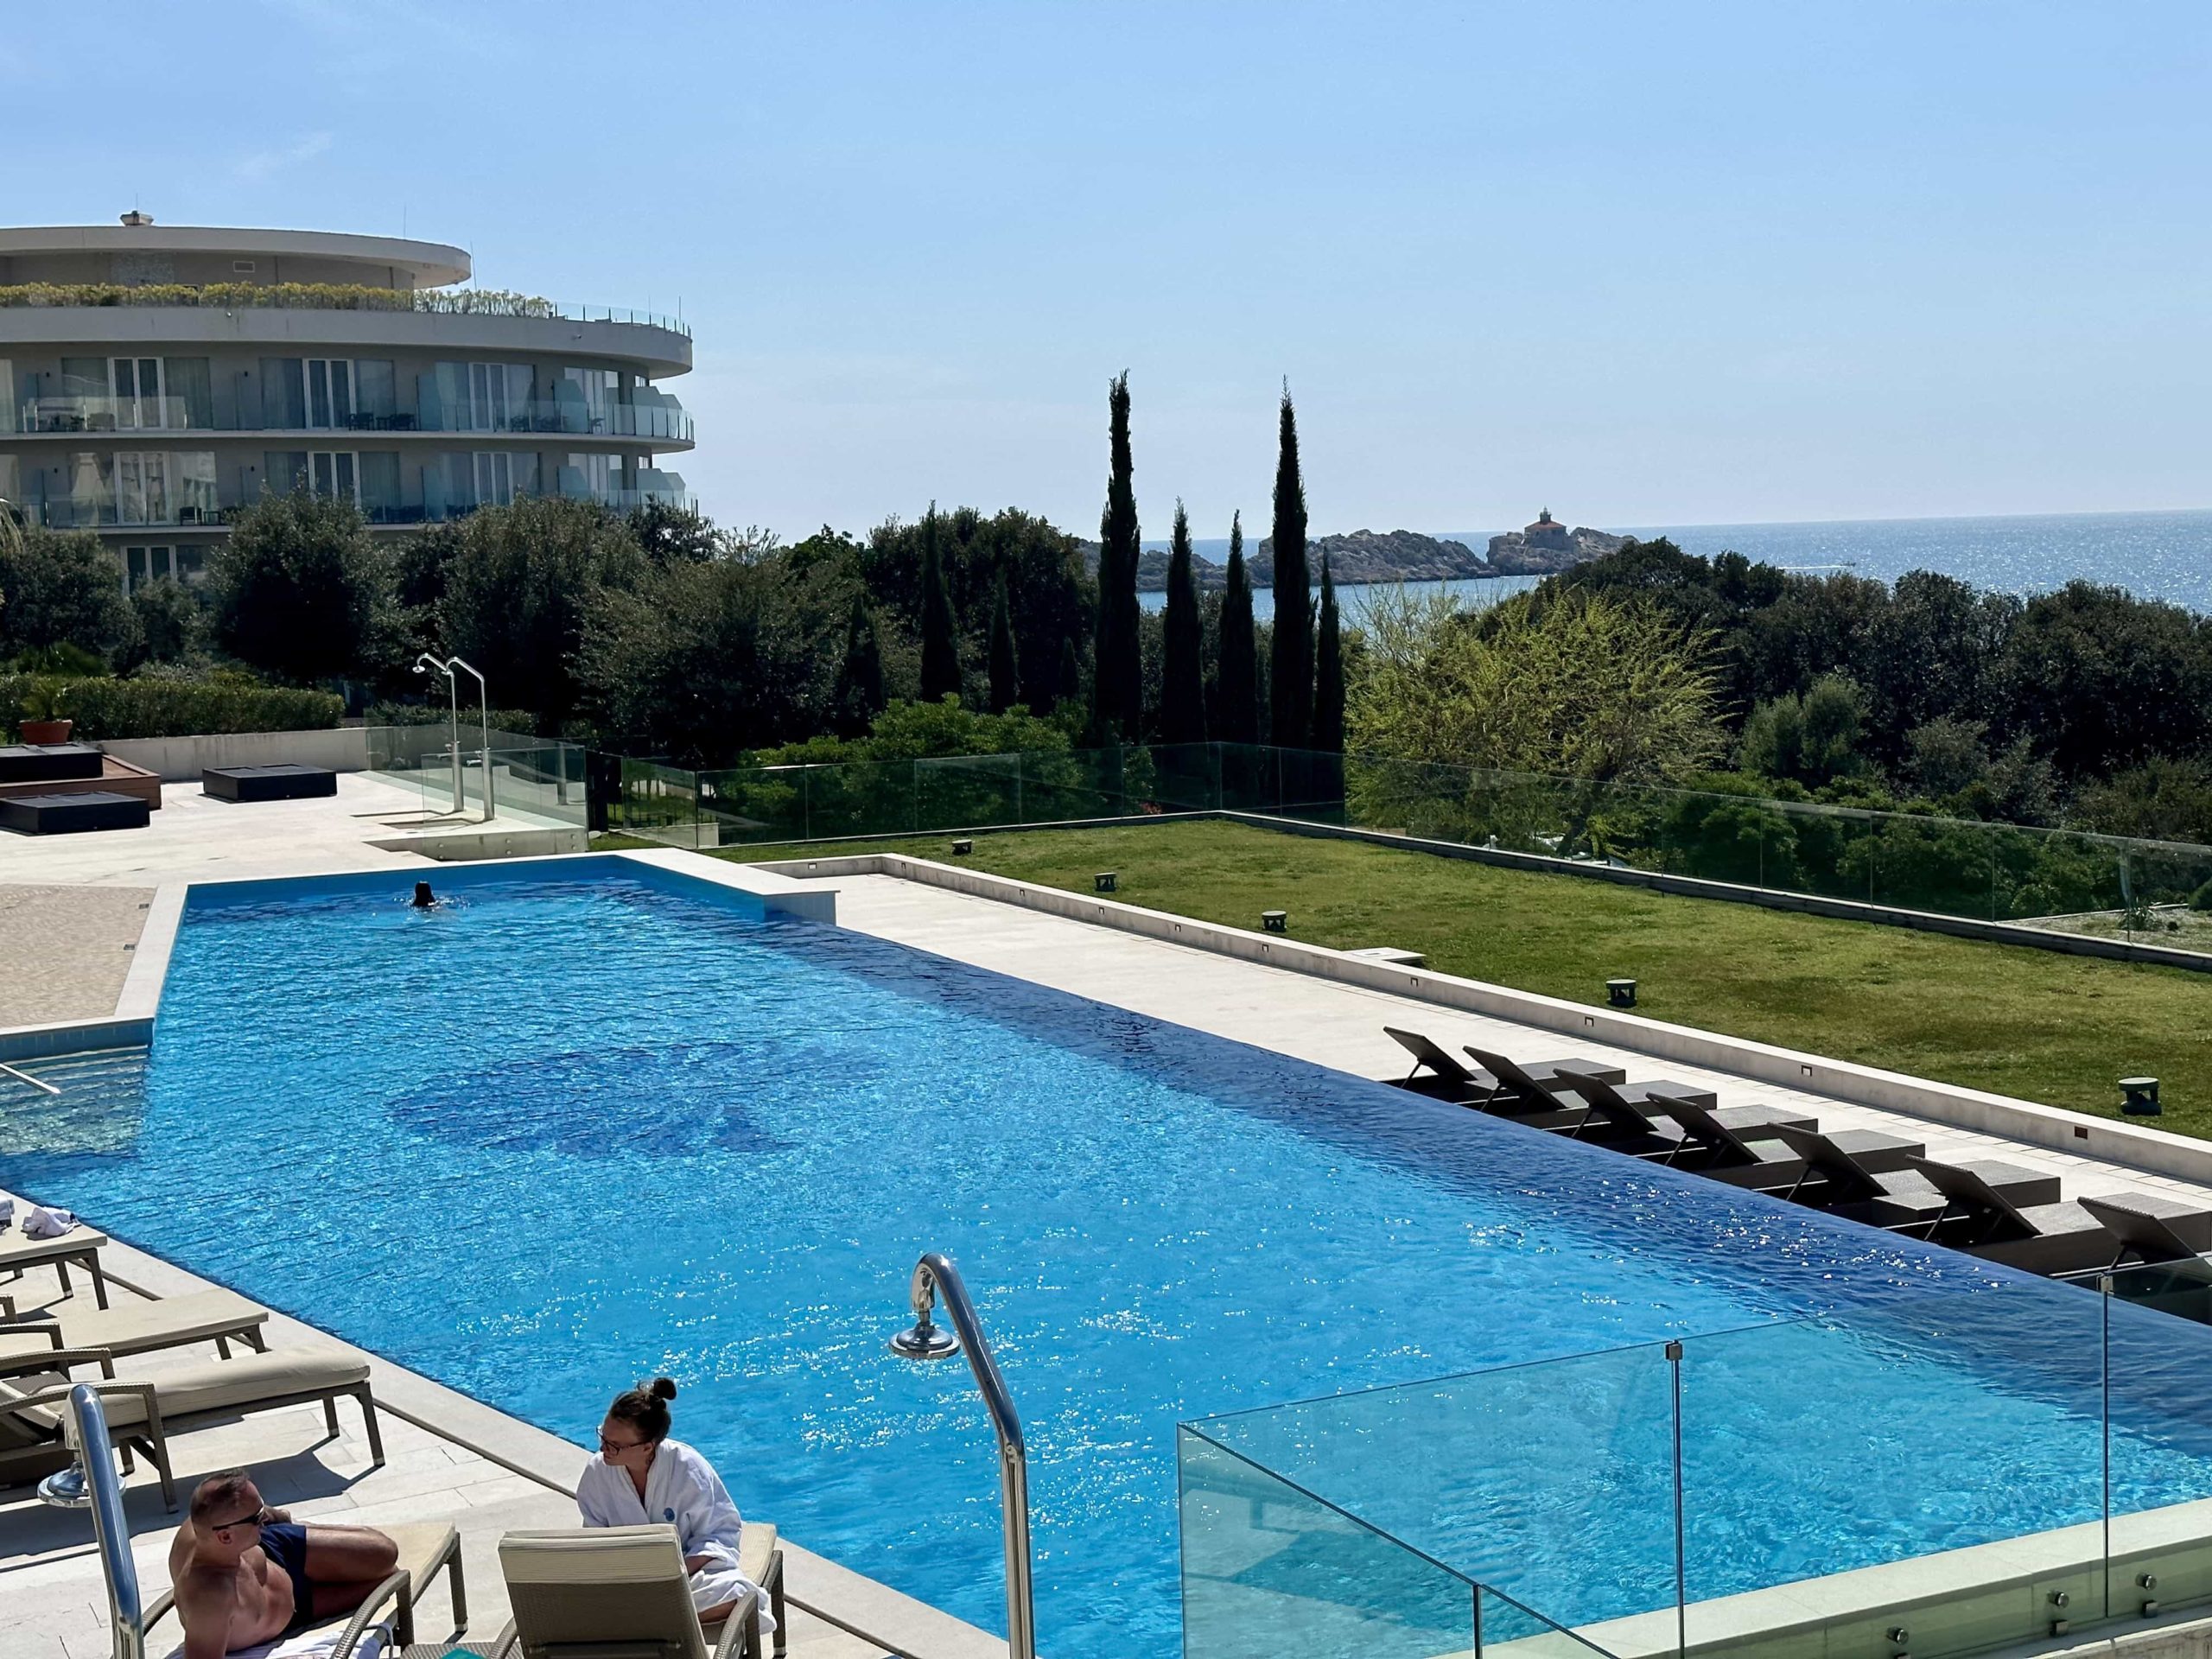 A view down over an outdoor infinity pool, with views over the sea